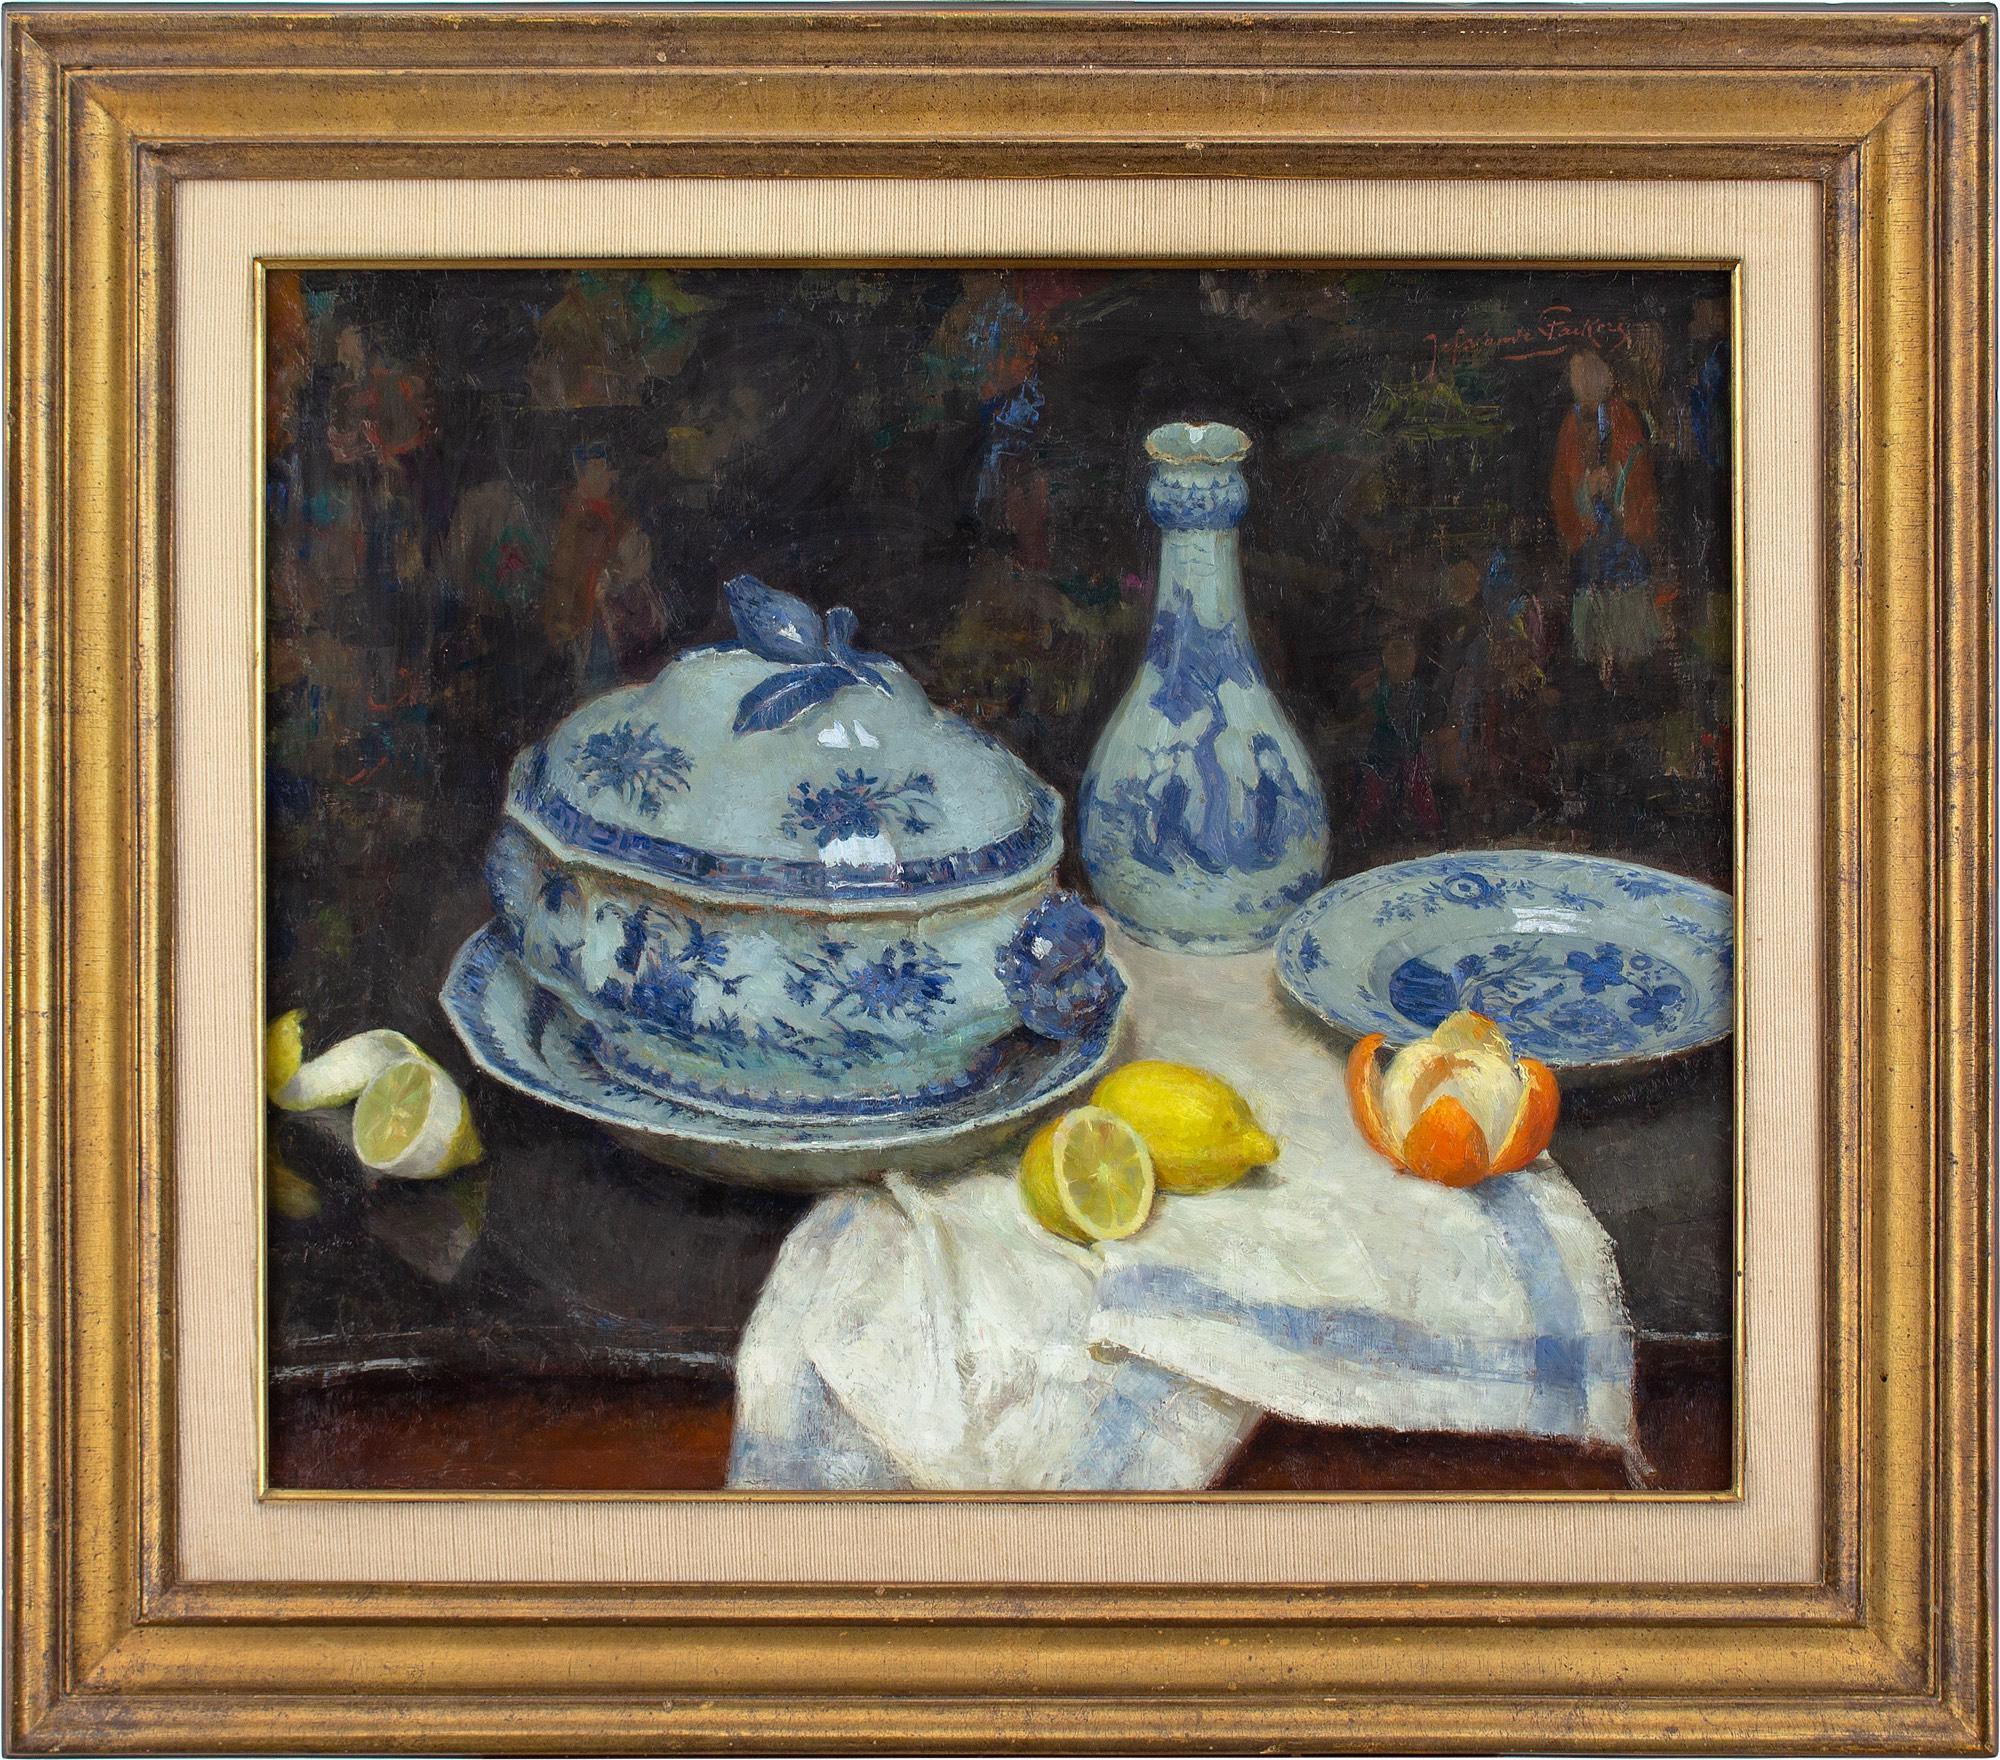 This fine mid-20th-century oil painting by Belgian artist Jef Van de Fackere (1879-1946) depicts a still life with blue and white ceramics, lemons and orange.

Van de Fackere was a precocious talent who became a teacher at the Academy of Fine Arts